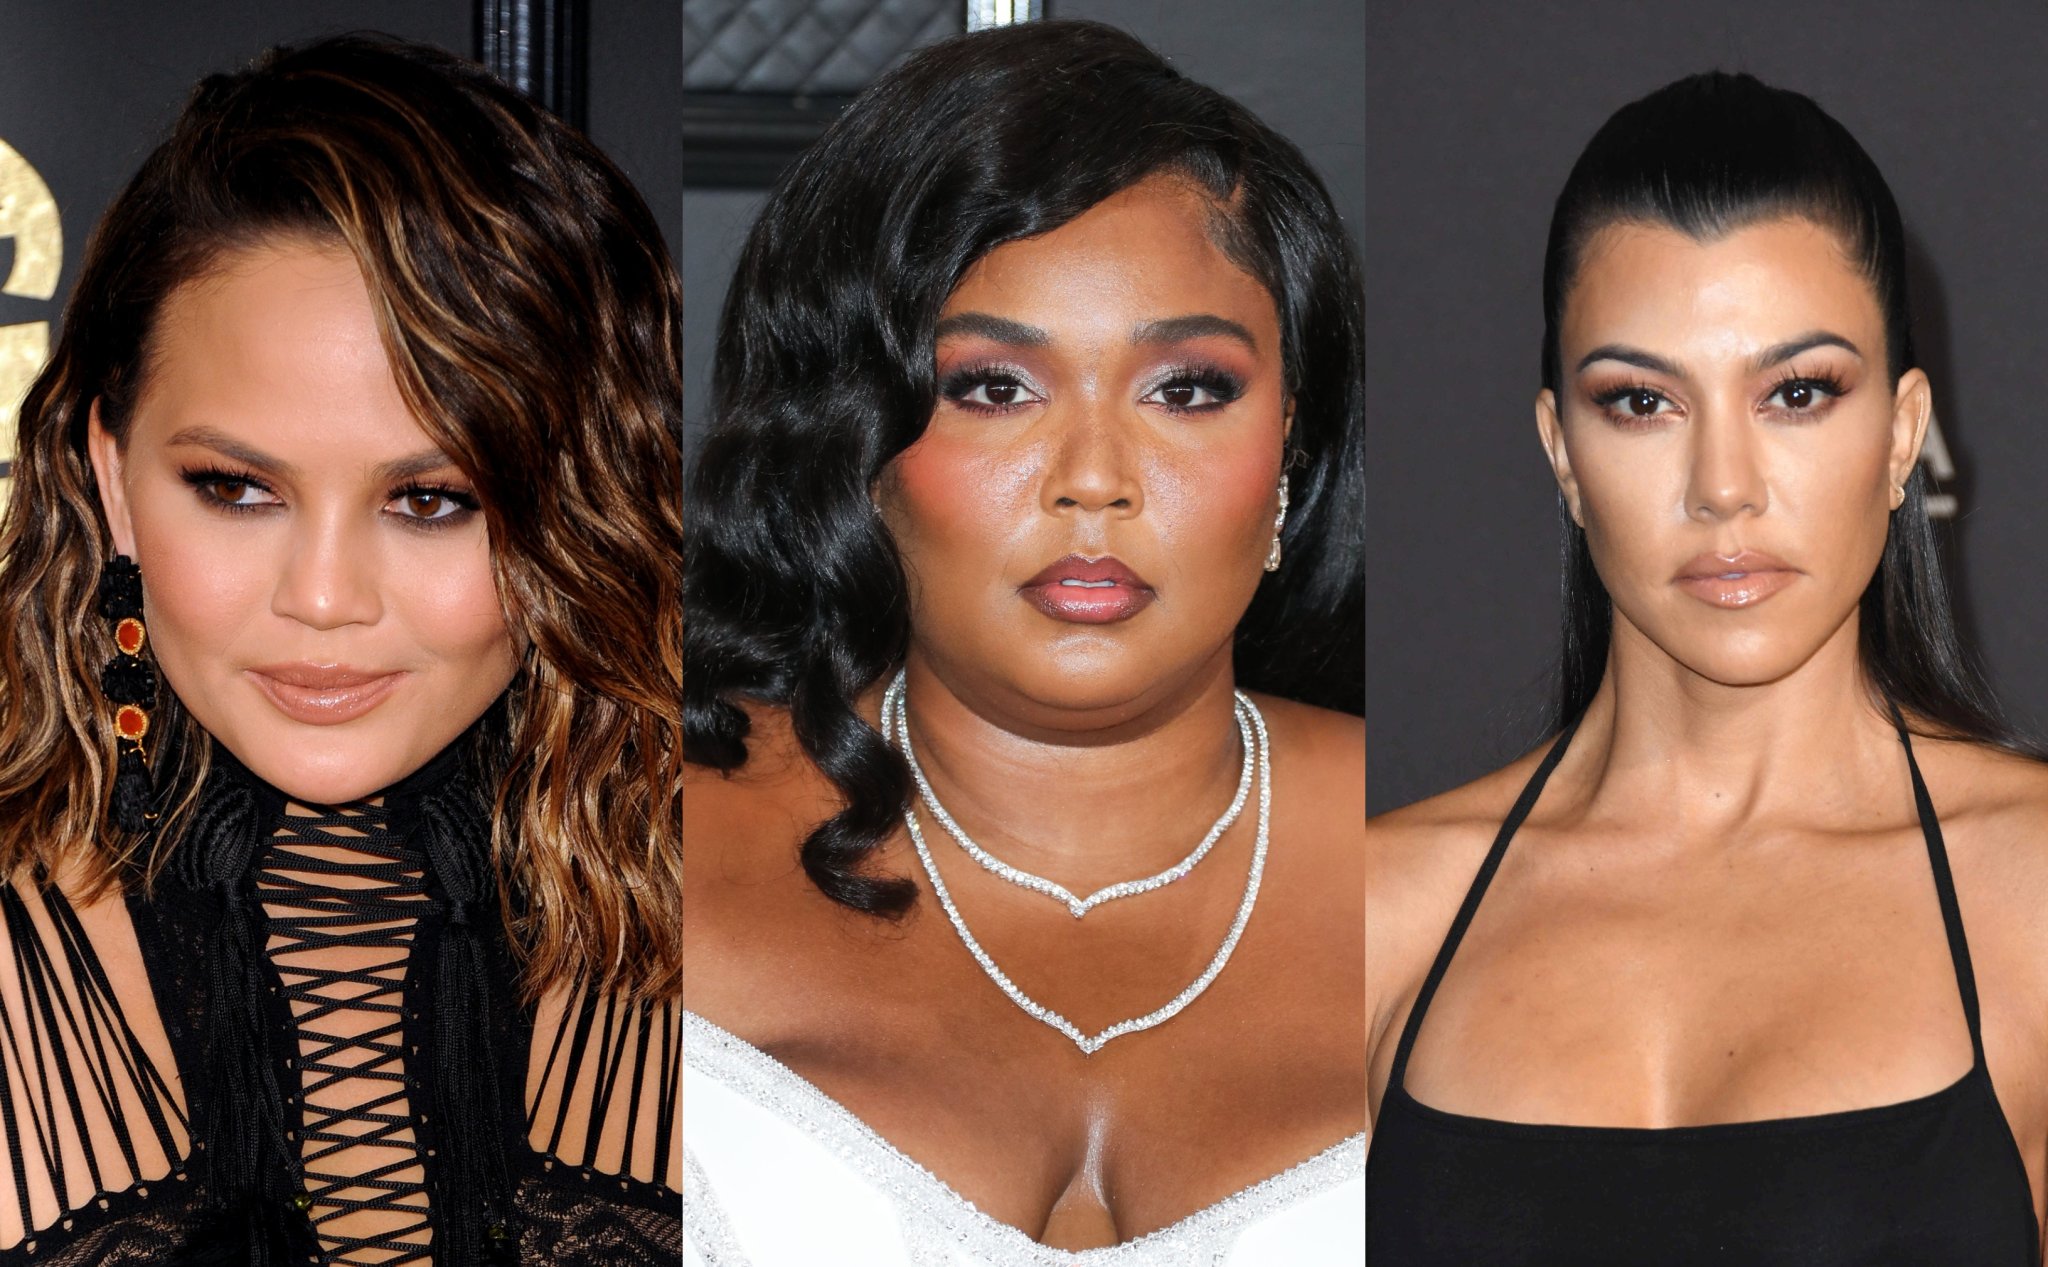 21 Celebs Who Shut Down Body Shamers in the Best Way